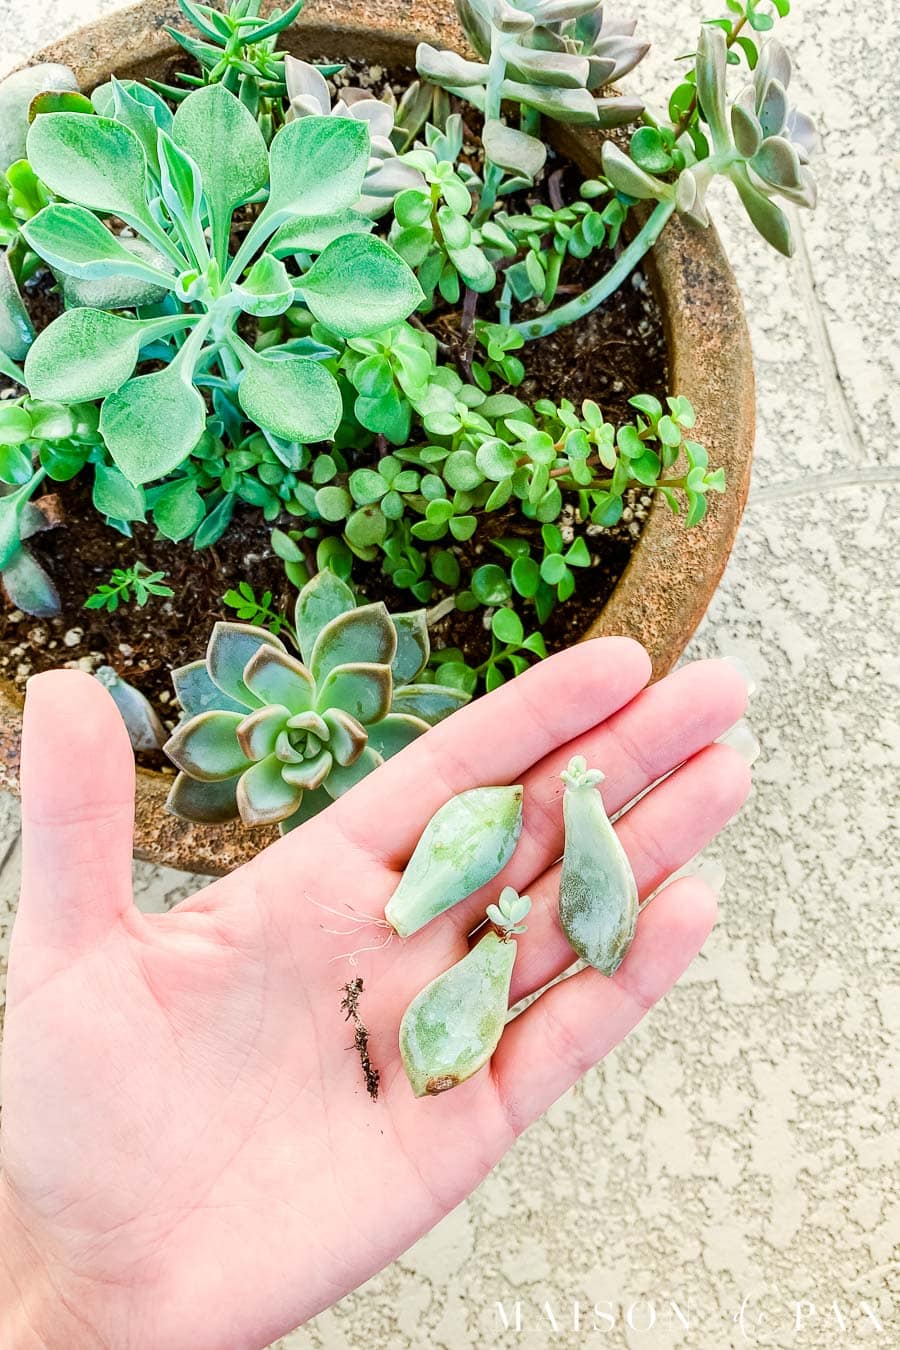 How to Propagate Succulents from Cuttings or Leaves